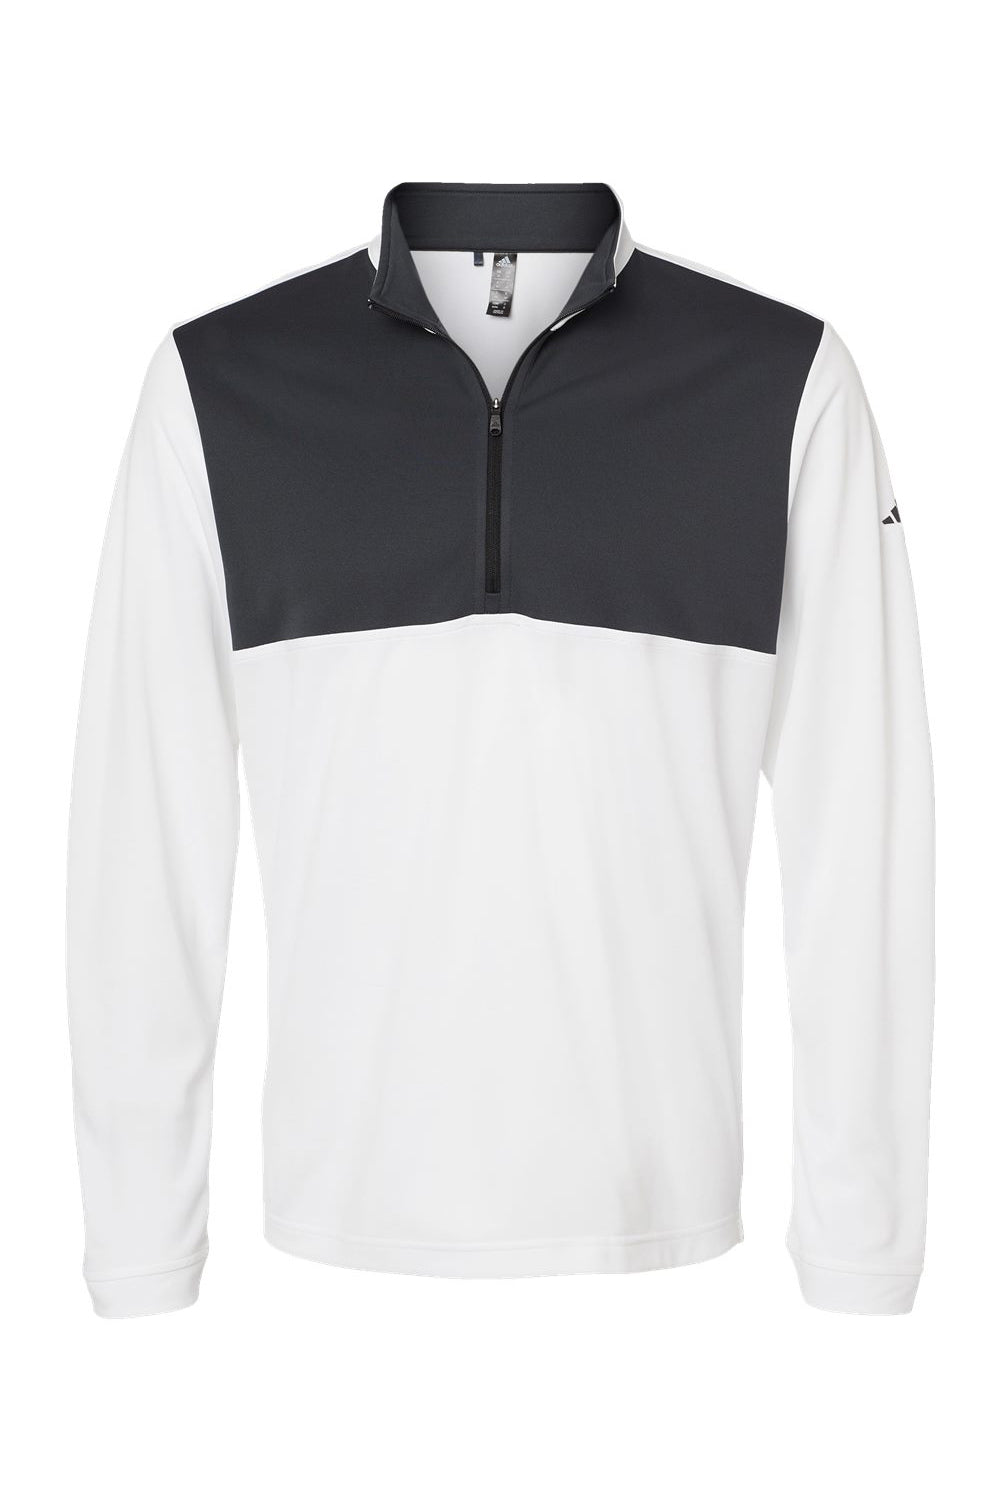 Adidas A280 Mens 1/4 Zip Pullover White/Carbon Grey Flat Front